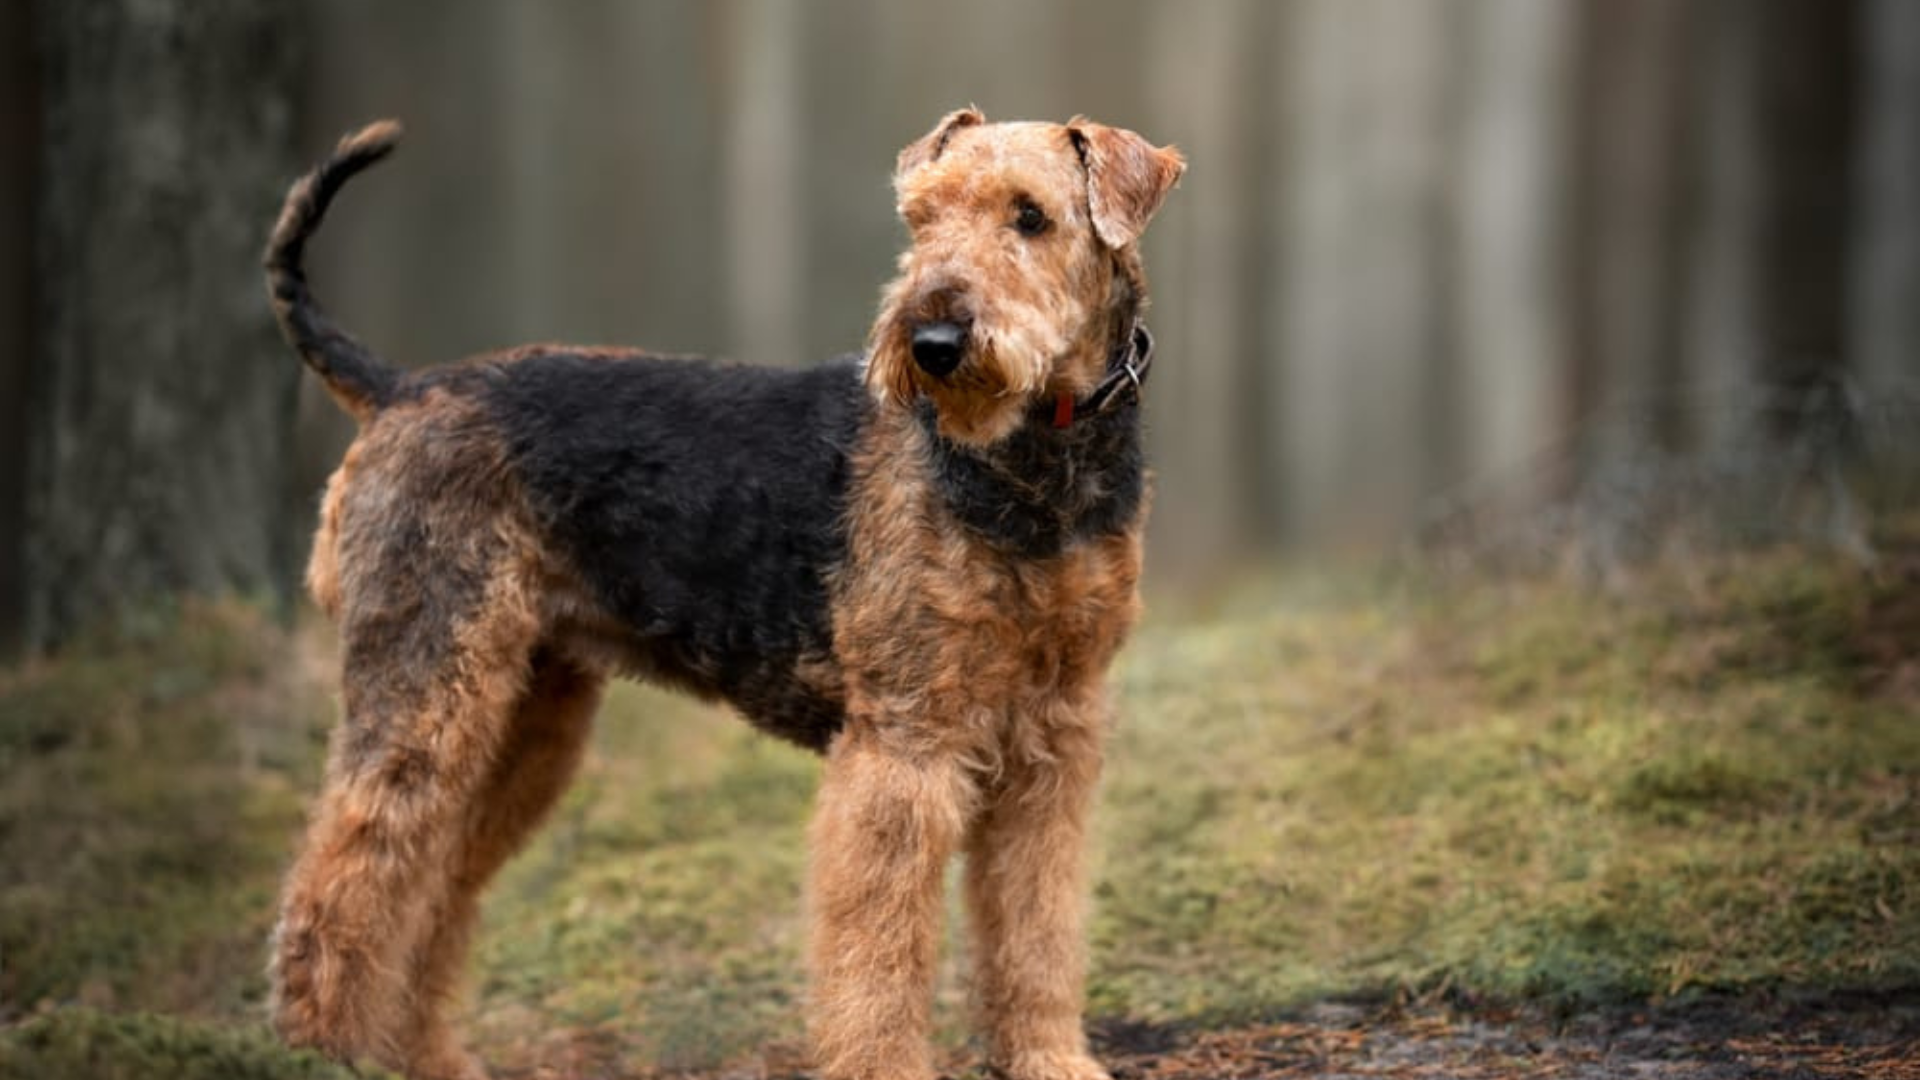 Can Airedale Terriers Be Left Alone?